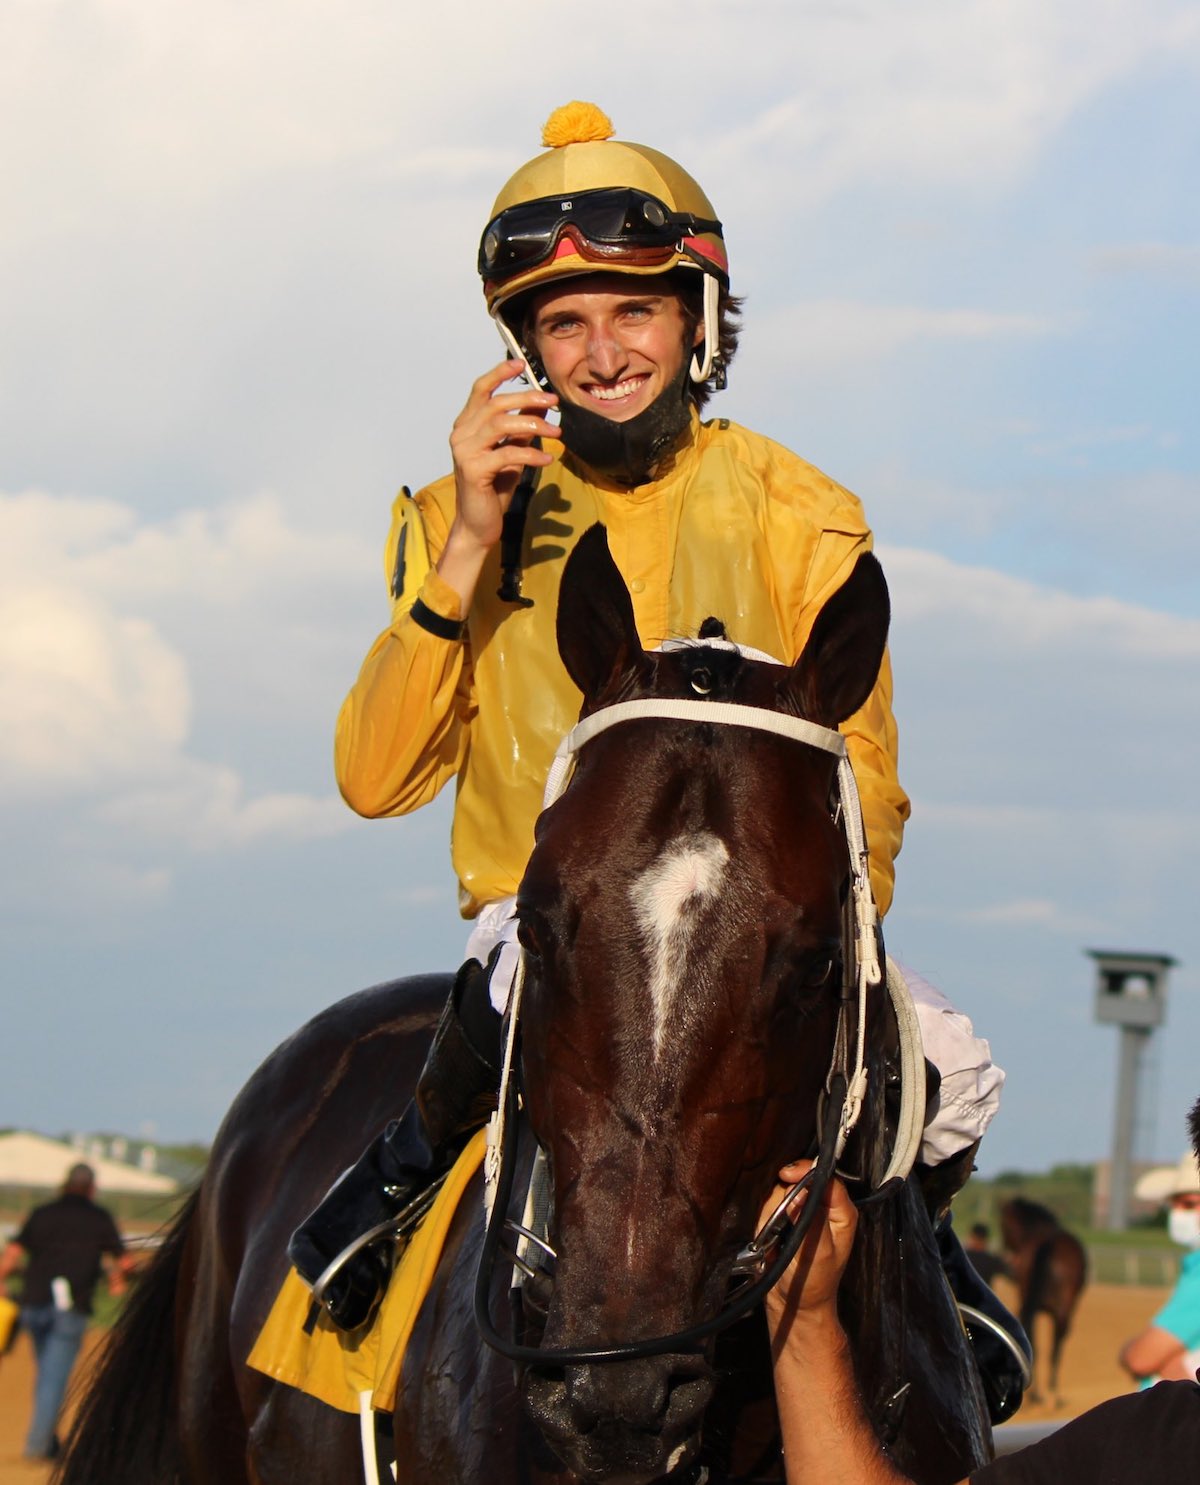 All smiles: Keith J Asmussen after landing his first career success on Inis Gulaire at Lone Star Park in Texas in July 2020. Photo: Lone Star